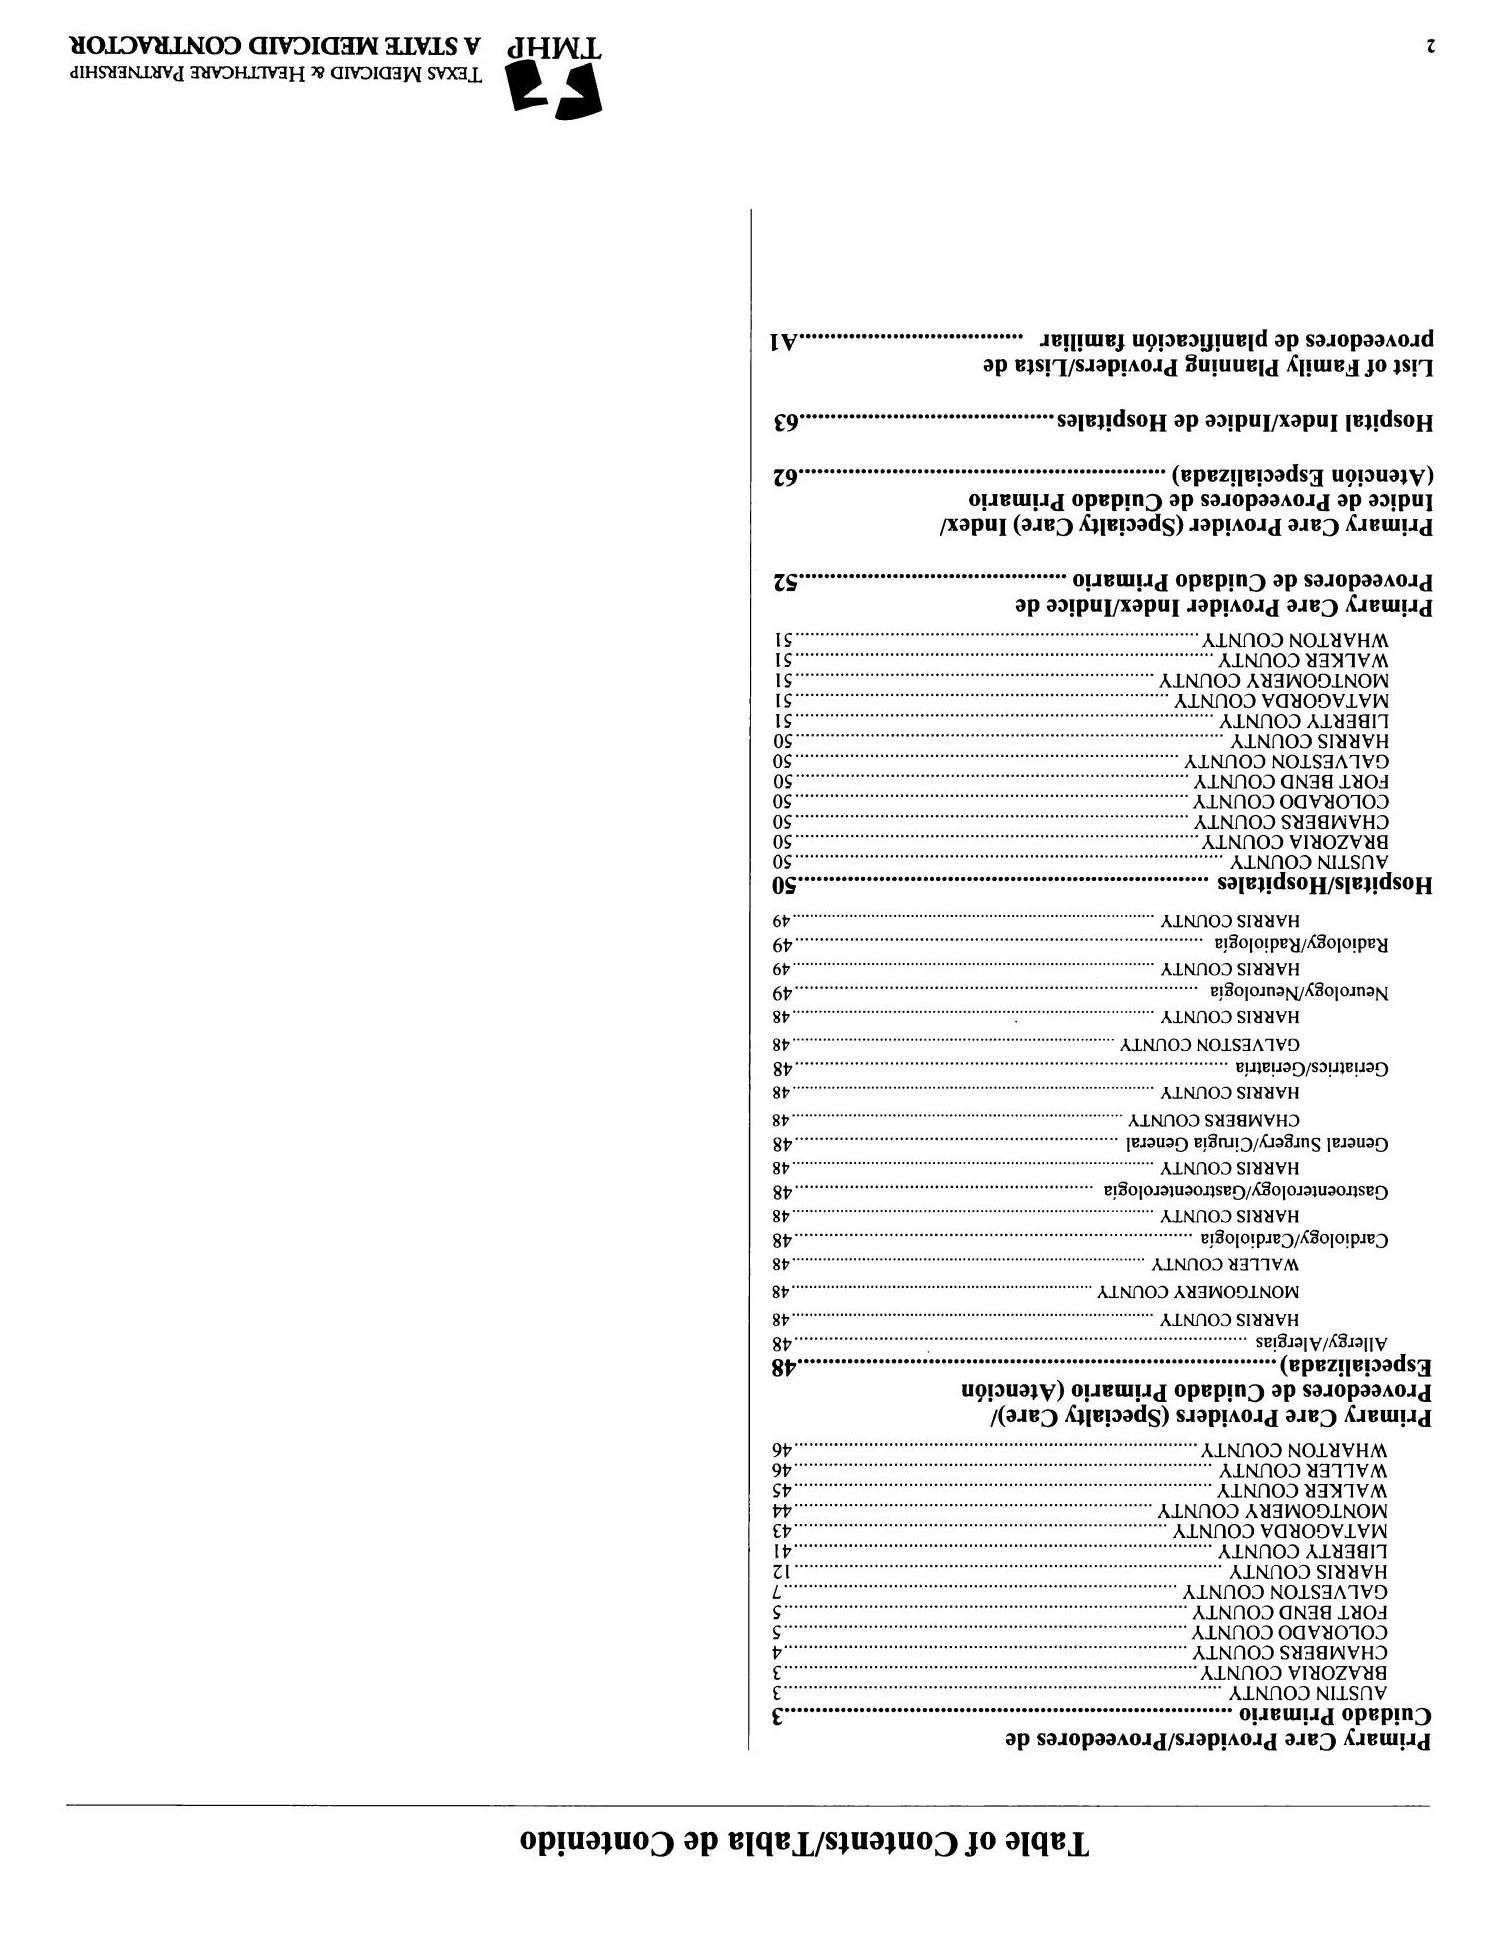 Primary Care Case Management Primary Care Provider and Hospital List: Gulf Coast, June 2011
                                                
                                                    2
                                                